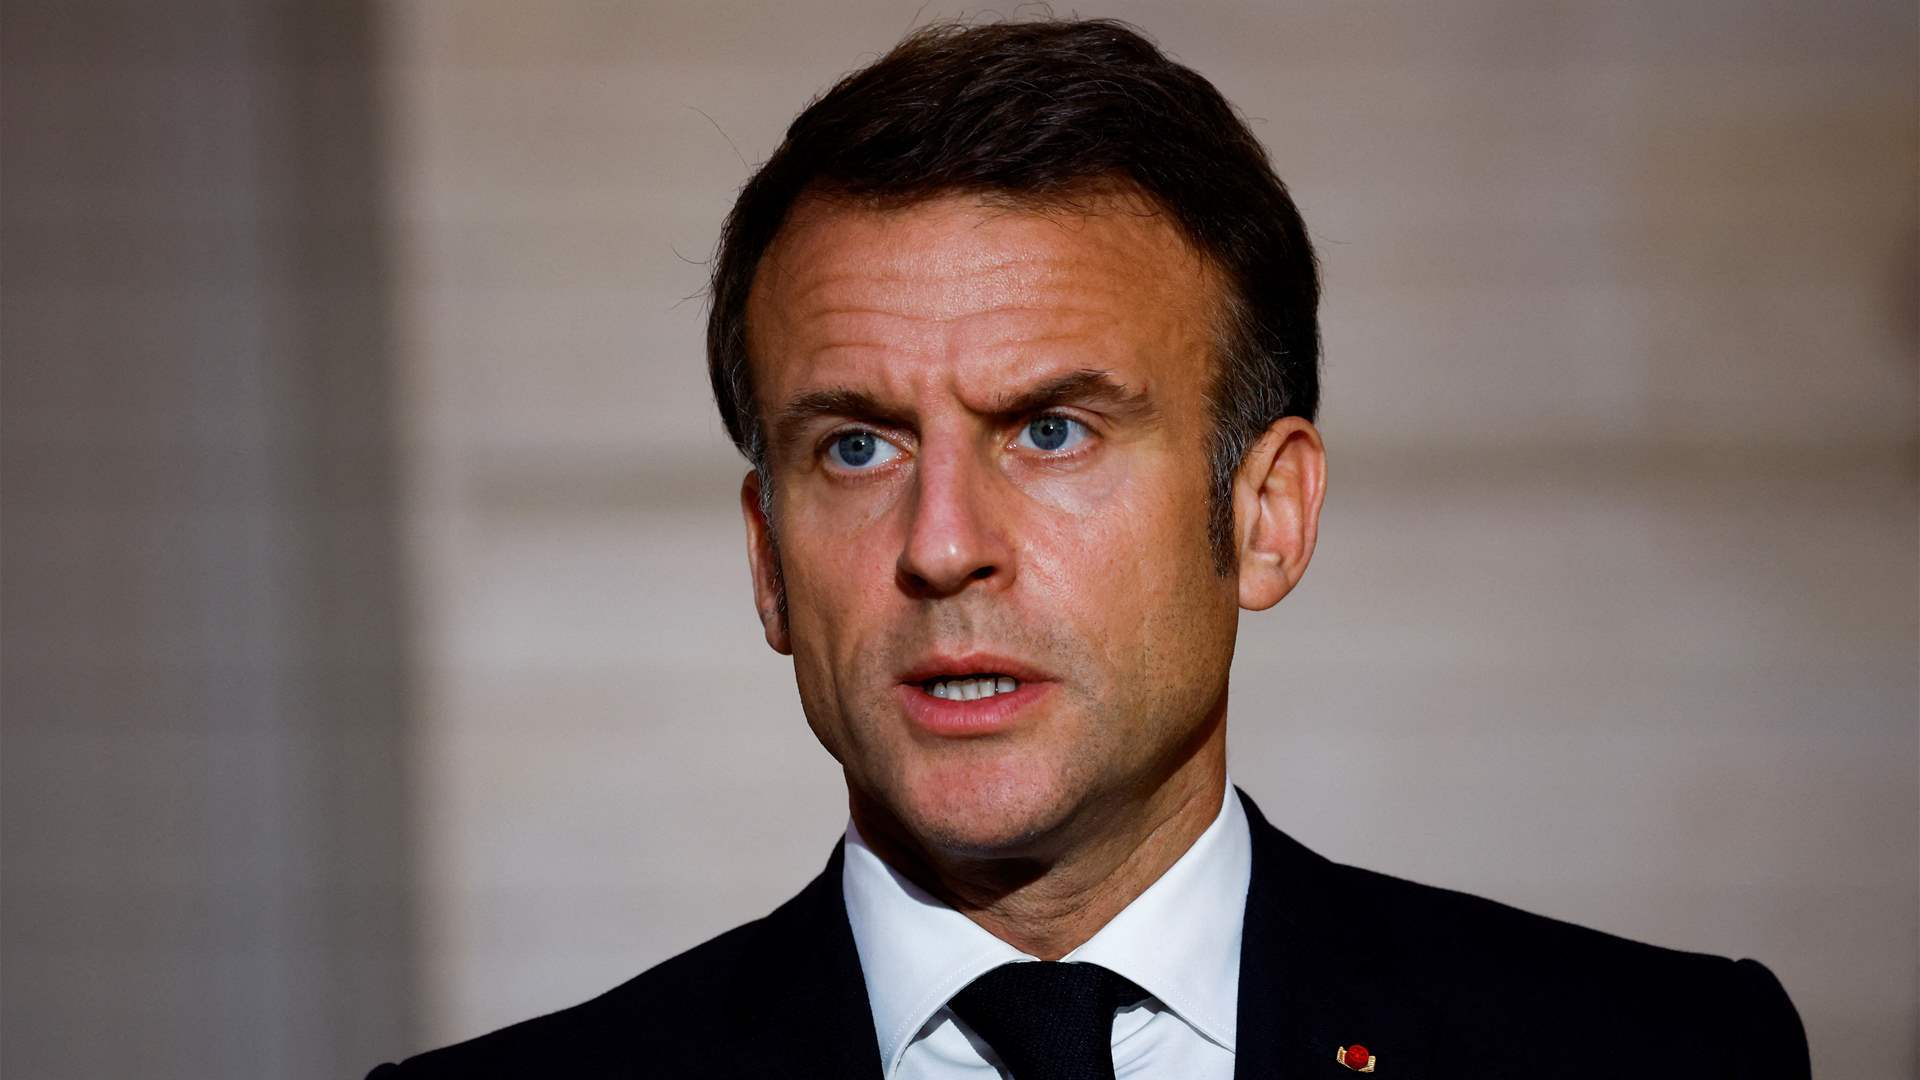 Macron: Israel, US, and France will discuss defusing tensions between Hezbollah and Israel